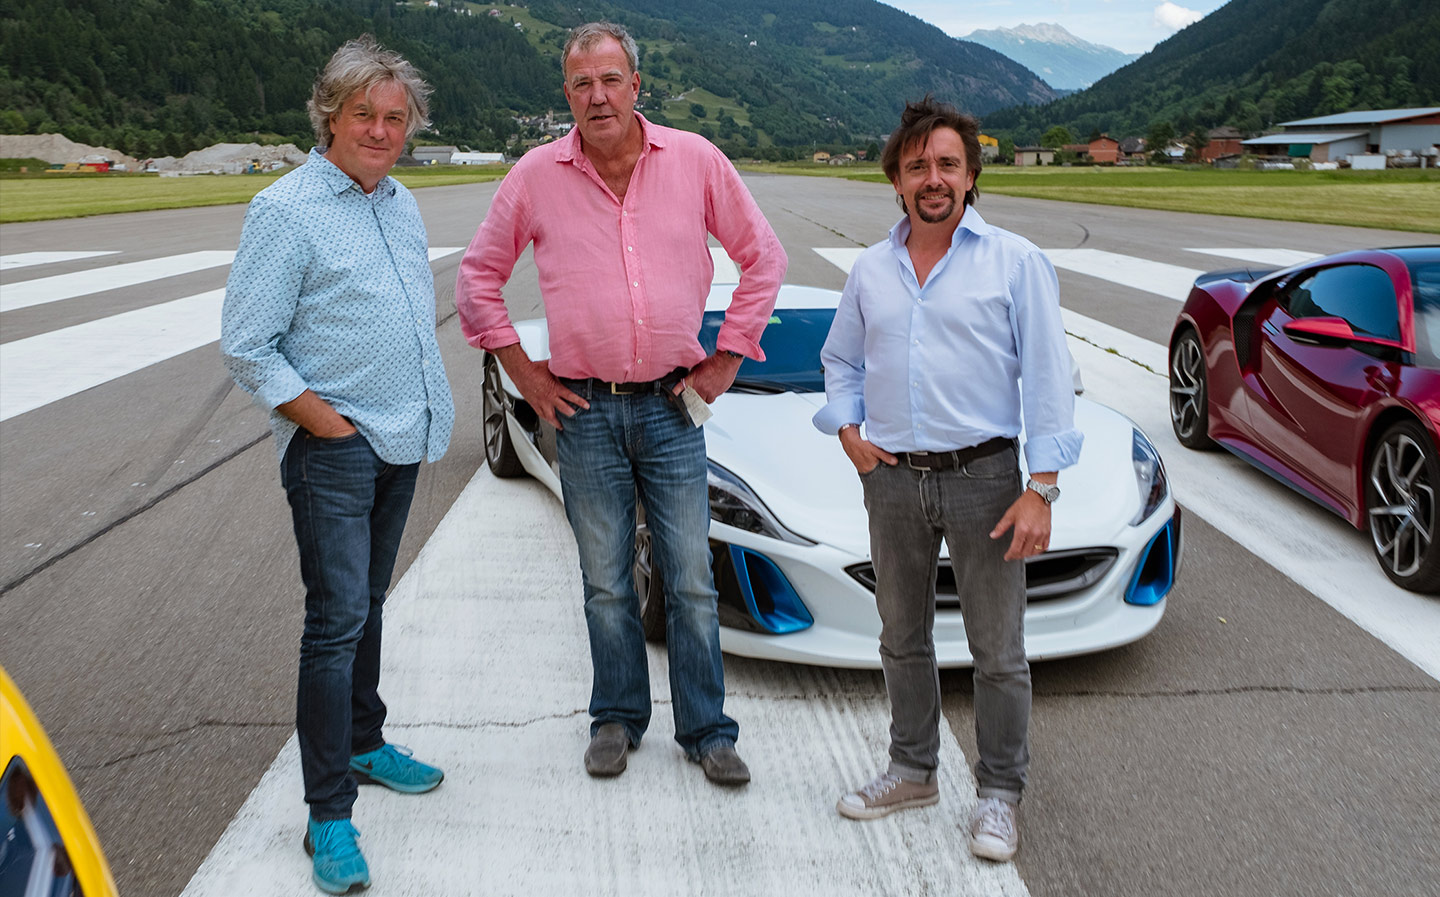 The grand tour season 2 episode 1 review round-up